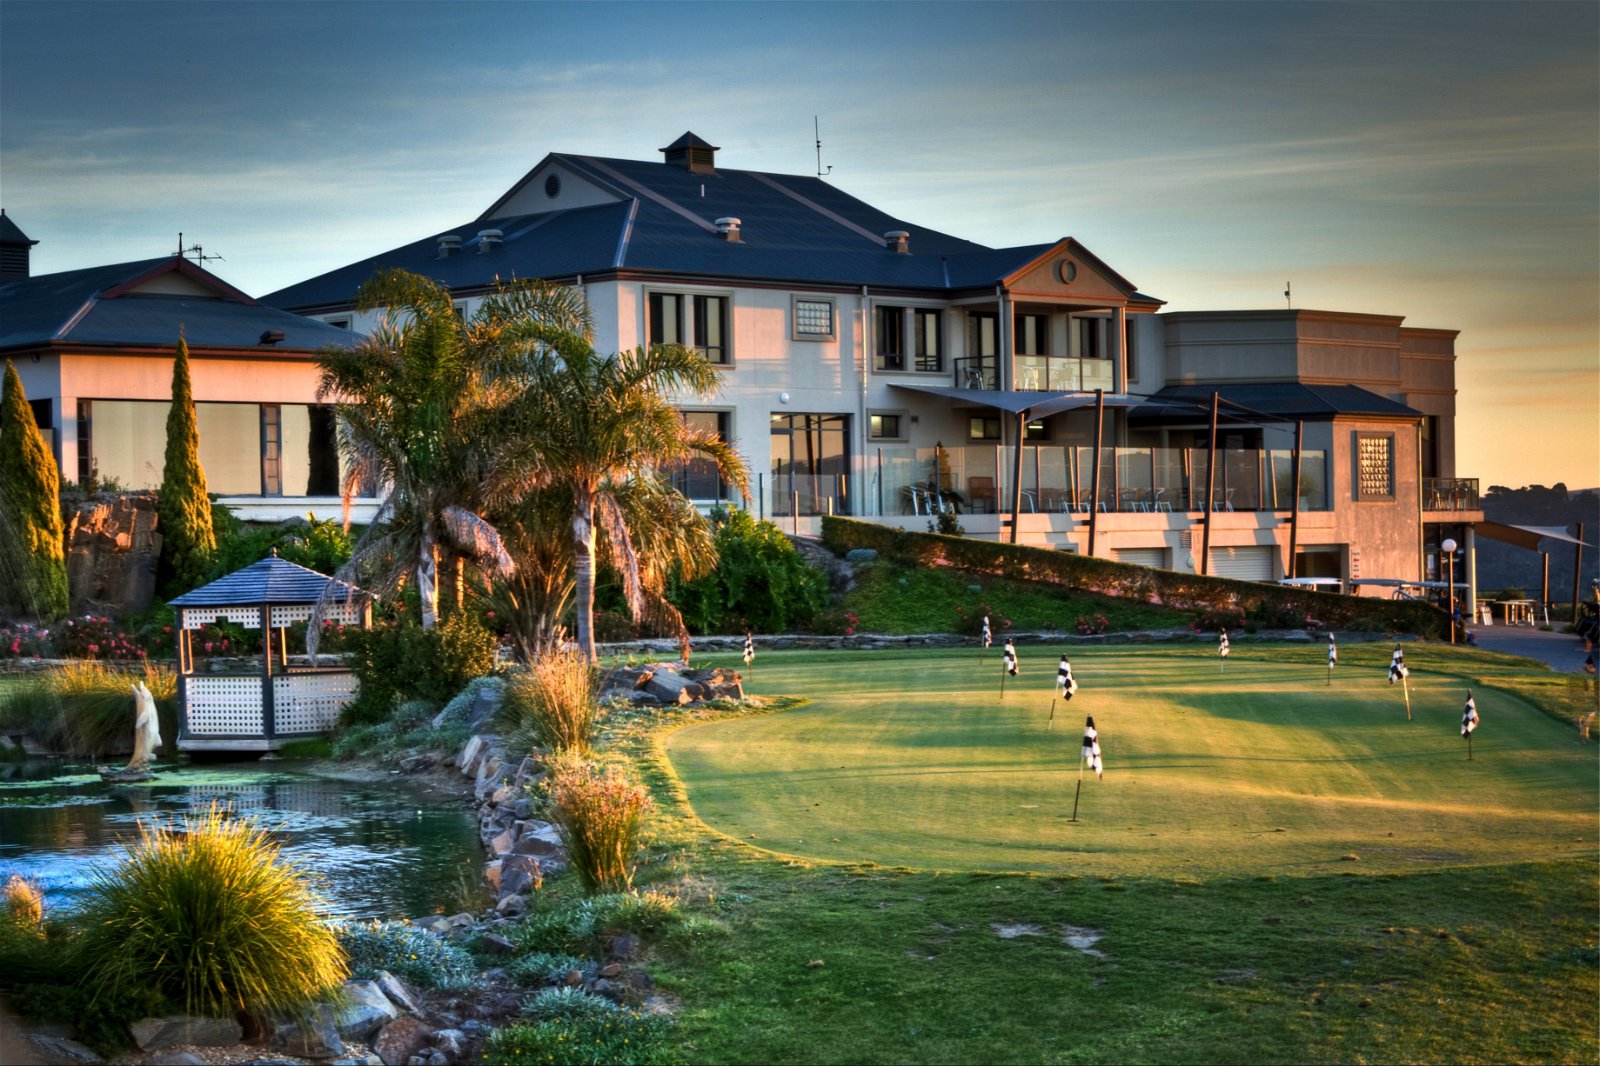 Baudins Restaurant at McCracken Country Club - Broome Tourism